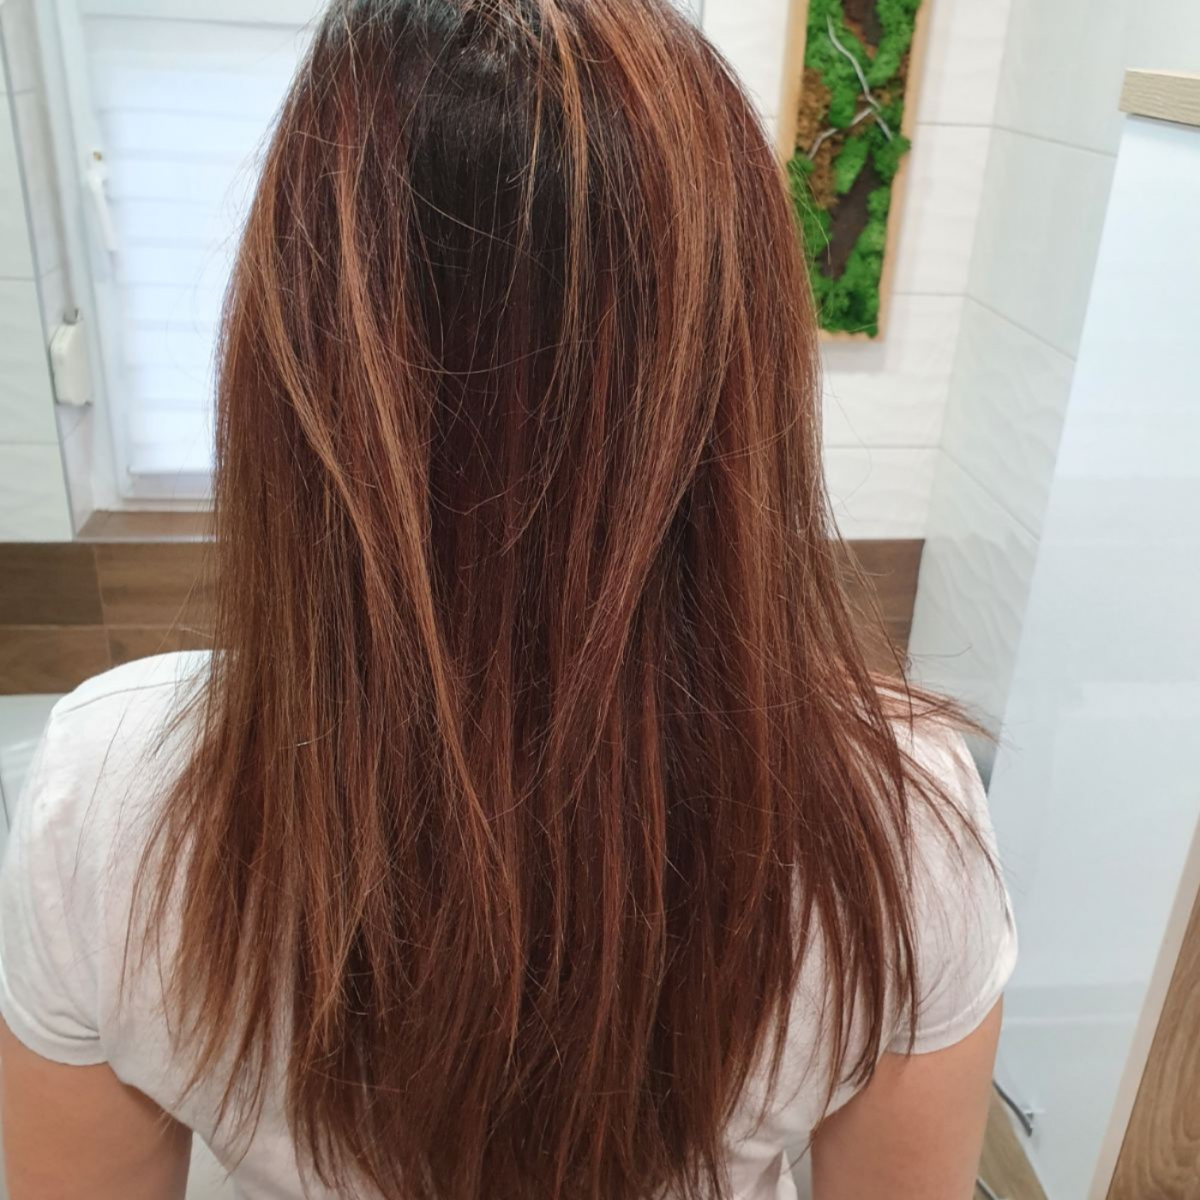 This is how my hair looked before treatment. It is washed two days ago, blow-dried, and ironed. I also use argan oil on my ends. 